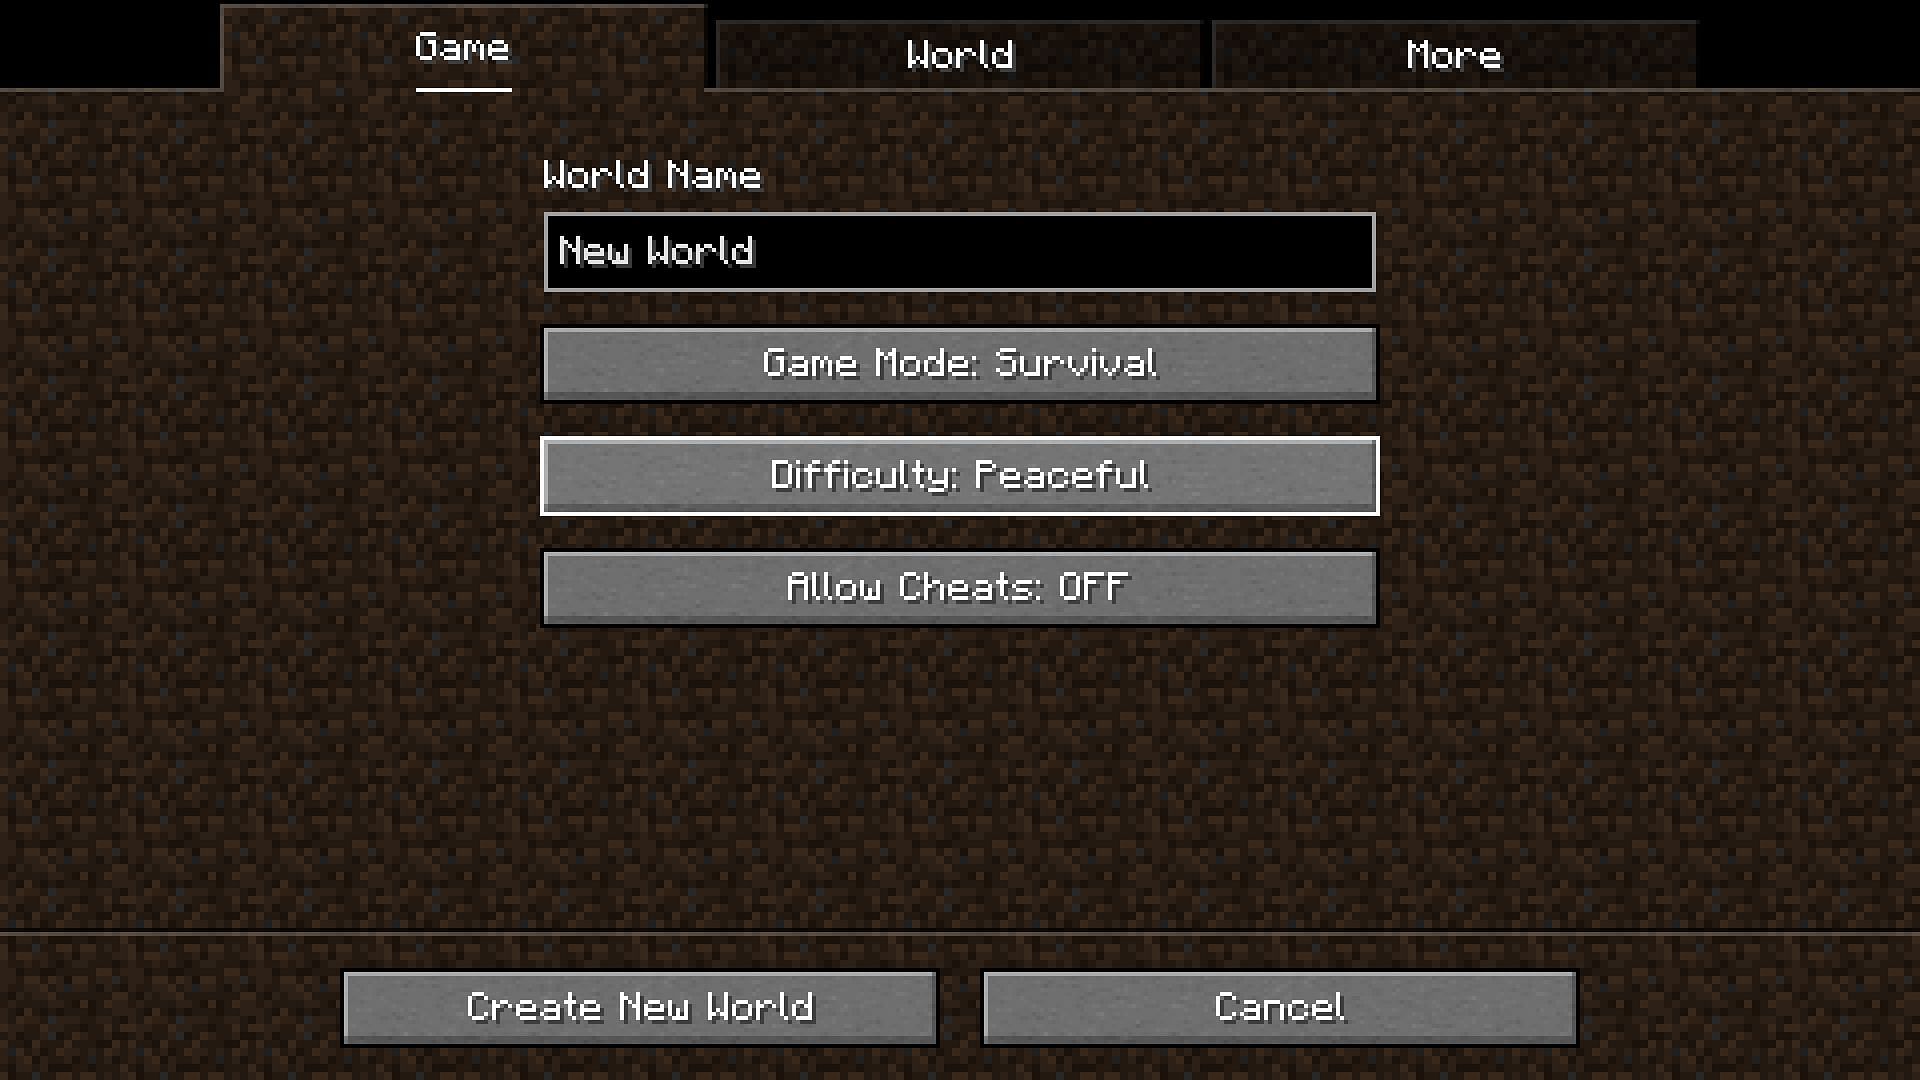 Peaceful difficulty being activated while creating a new Minecraft world.